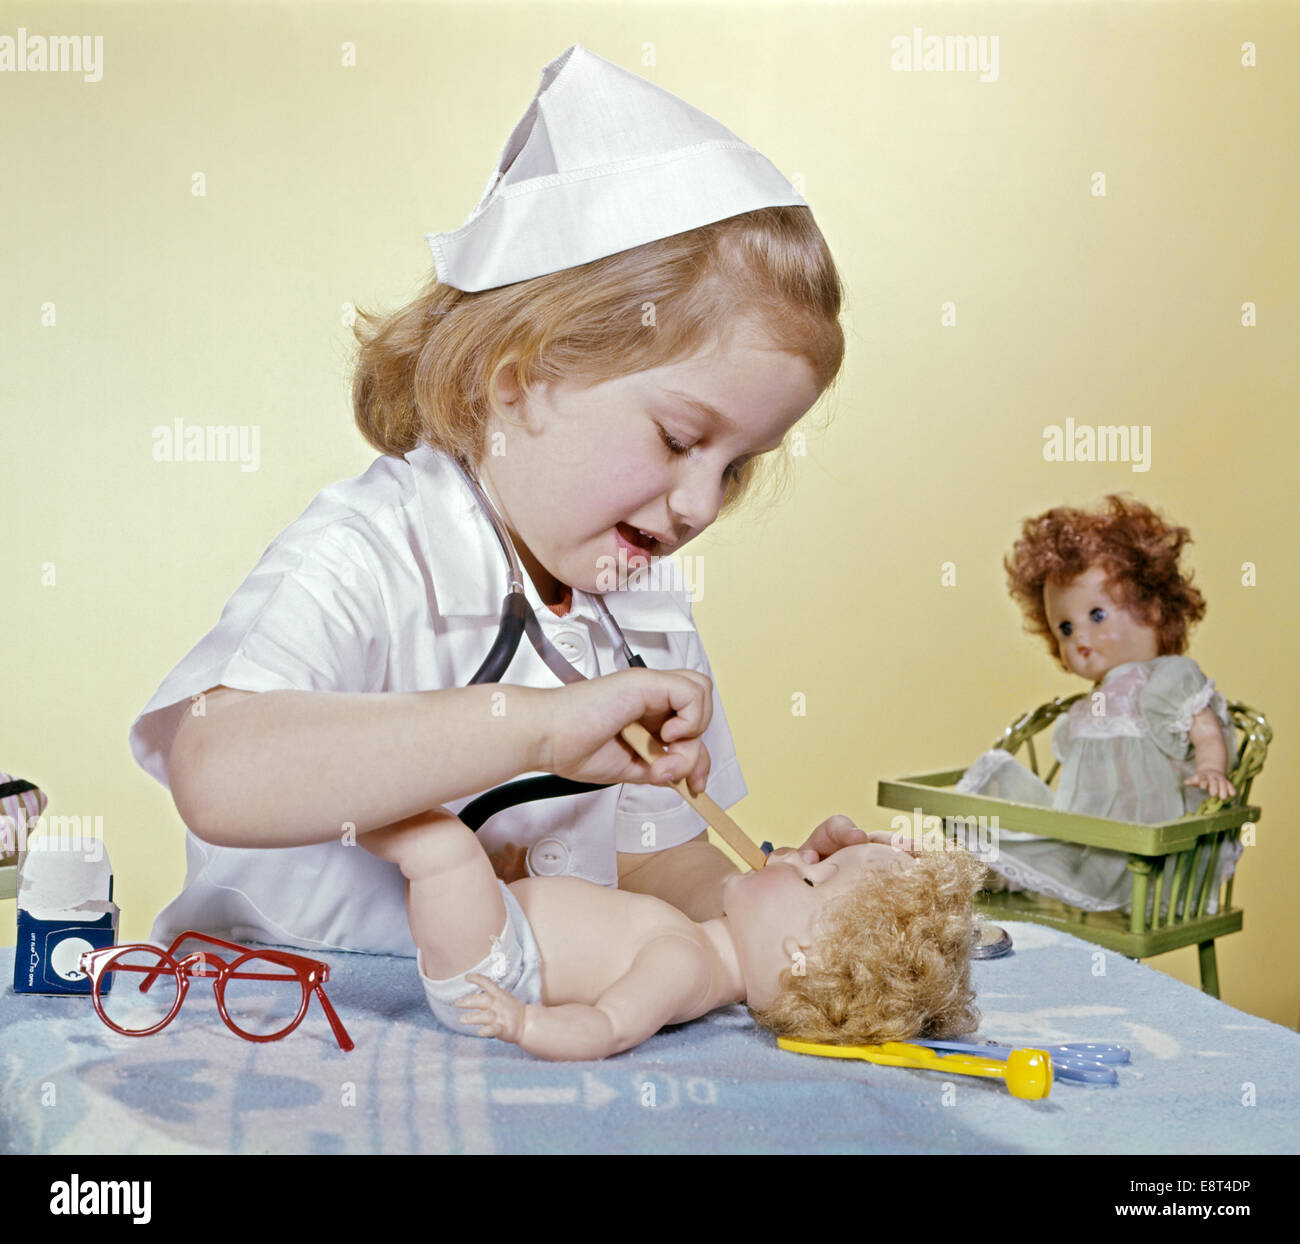 1960s LITTLE GIRL DRESSED UP AS A NURSE TAKING CARE OF HER DOLL Stock Photo